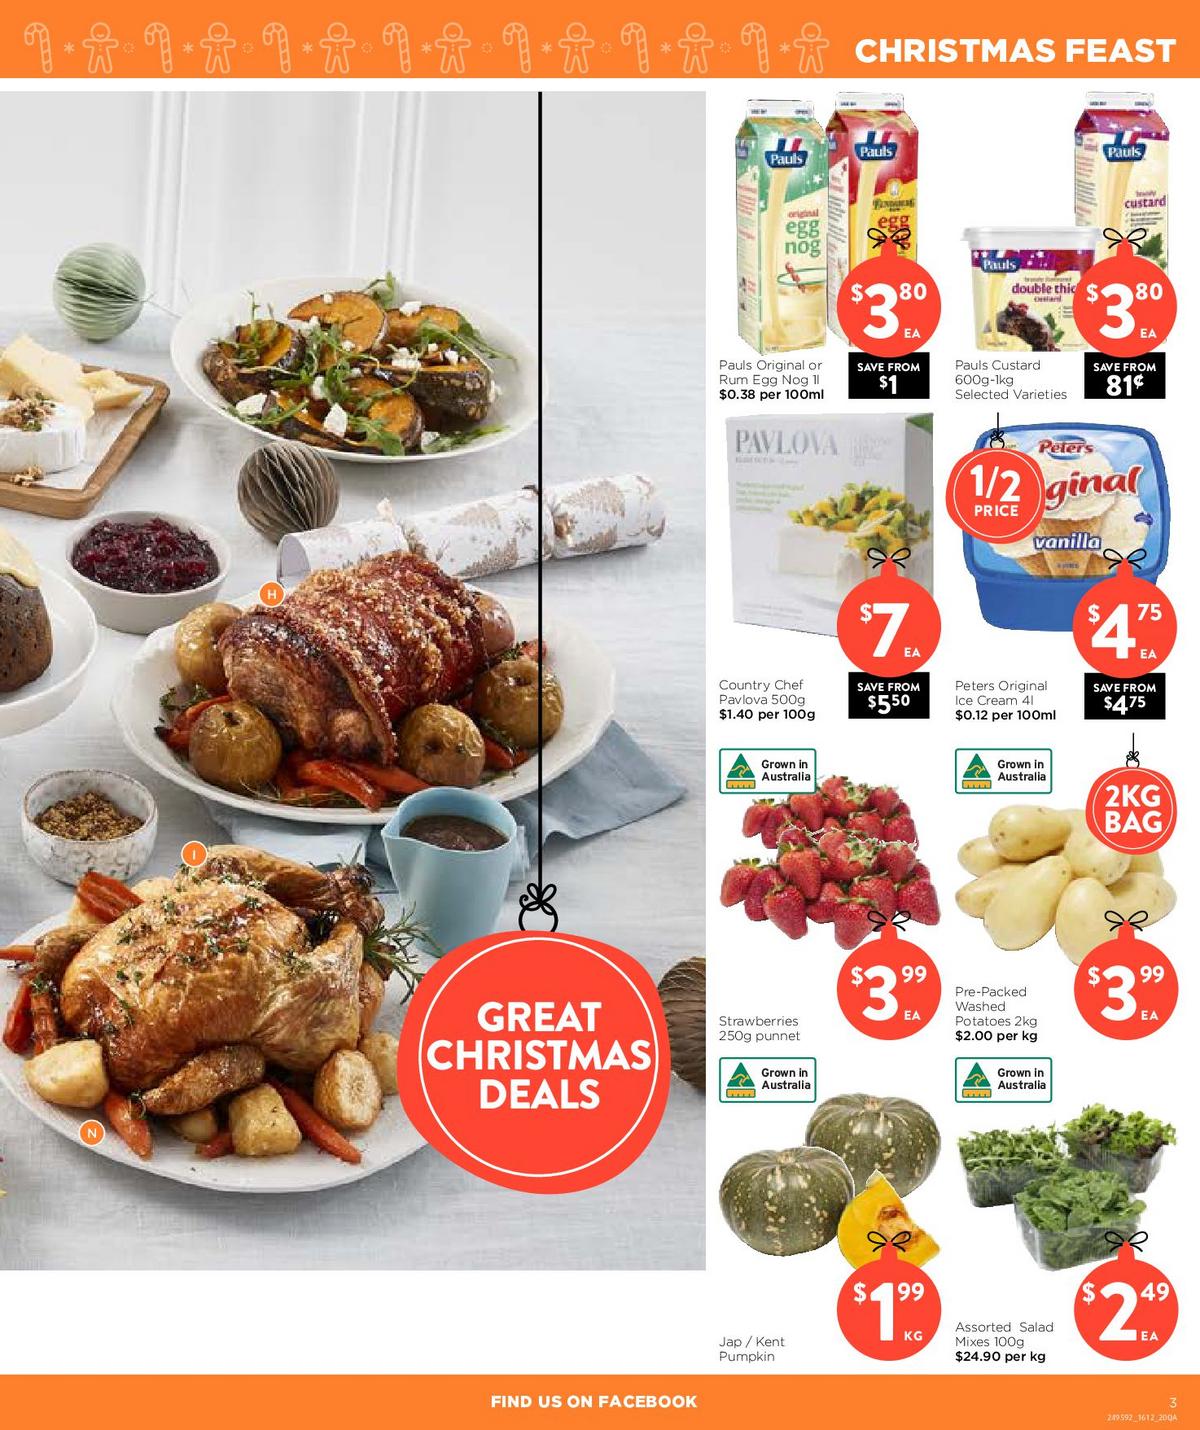 FoodWorks Supermarket Catalogues from 16 December